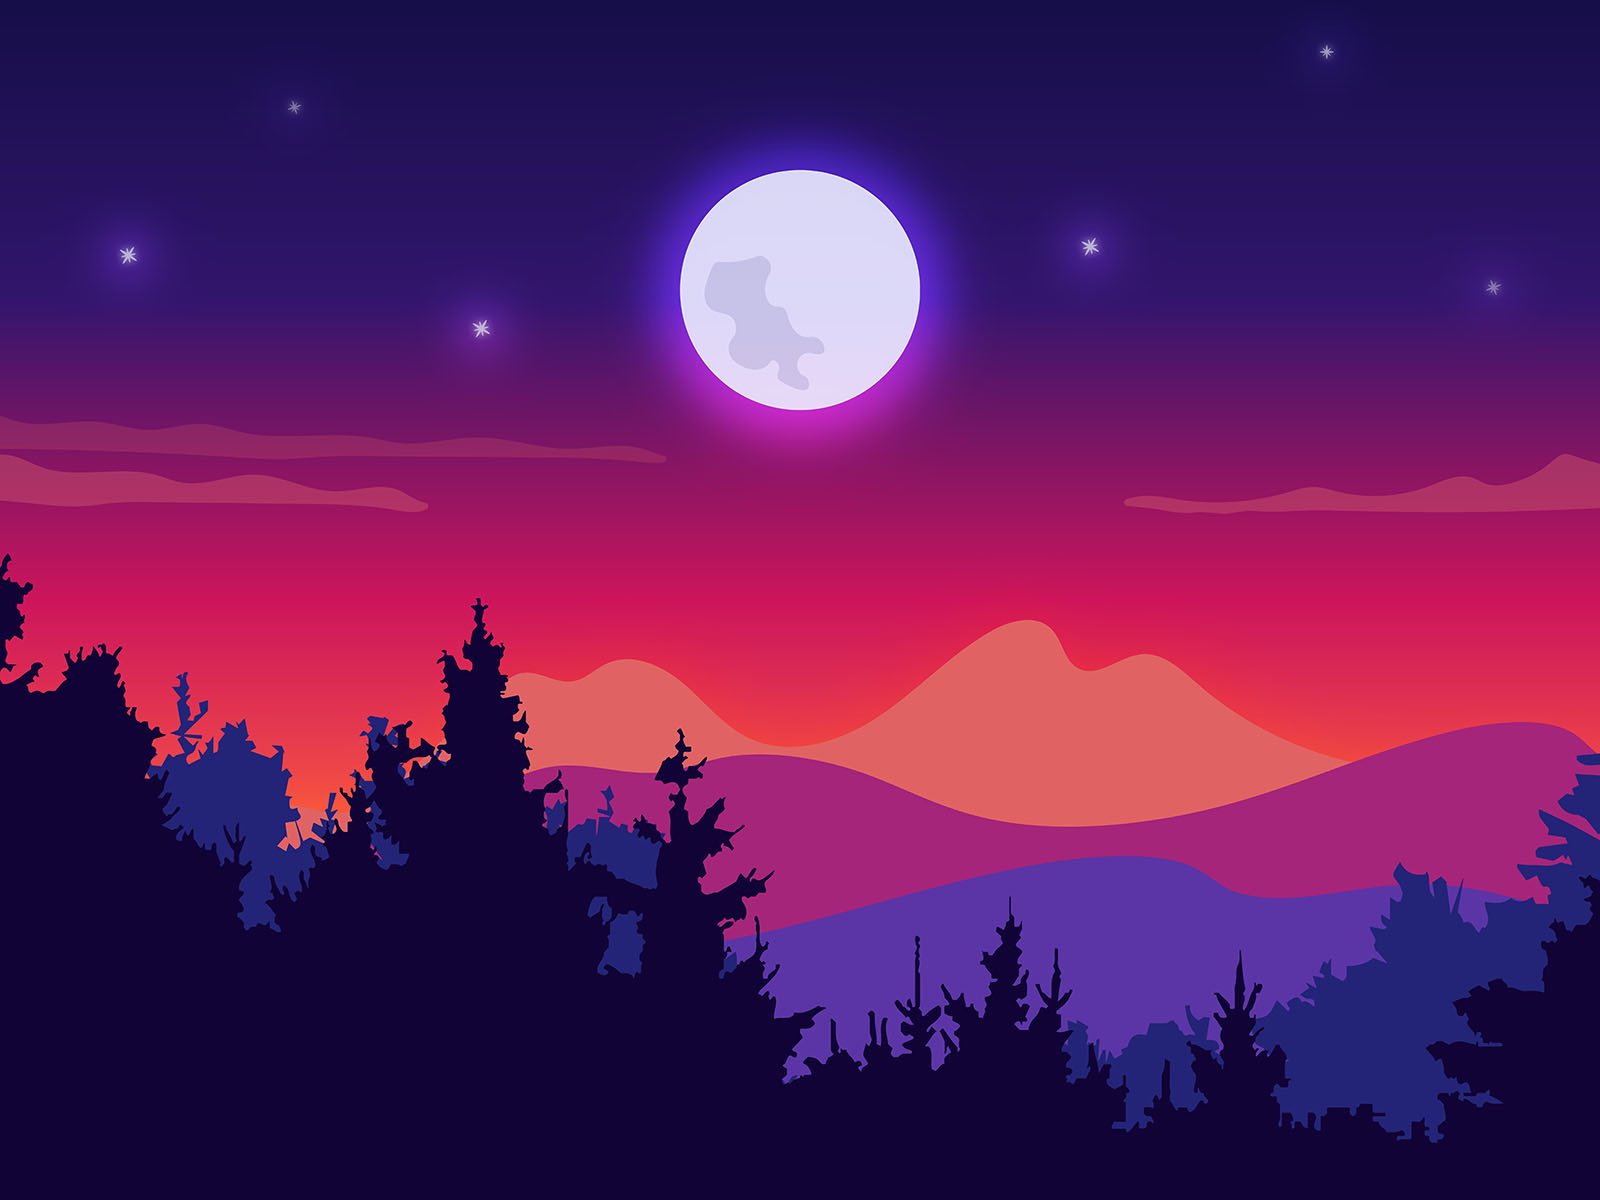 Night mountain sky scenery illustration by Graphicsfuel on Dribbble